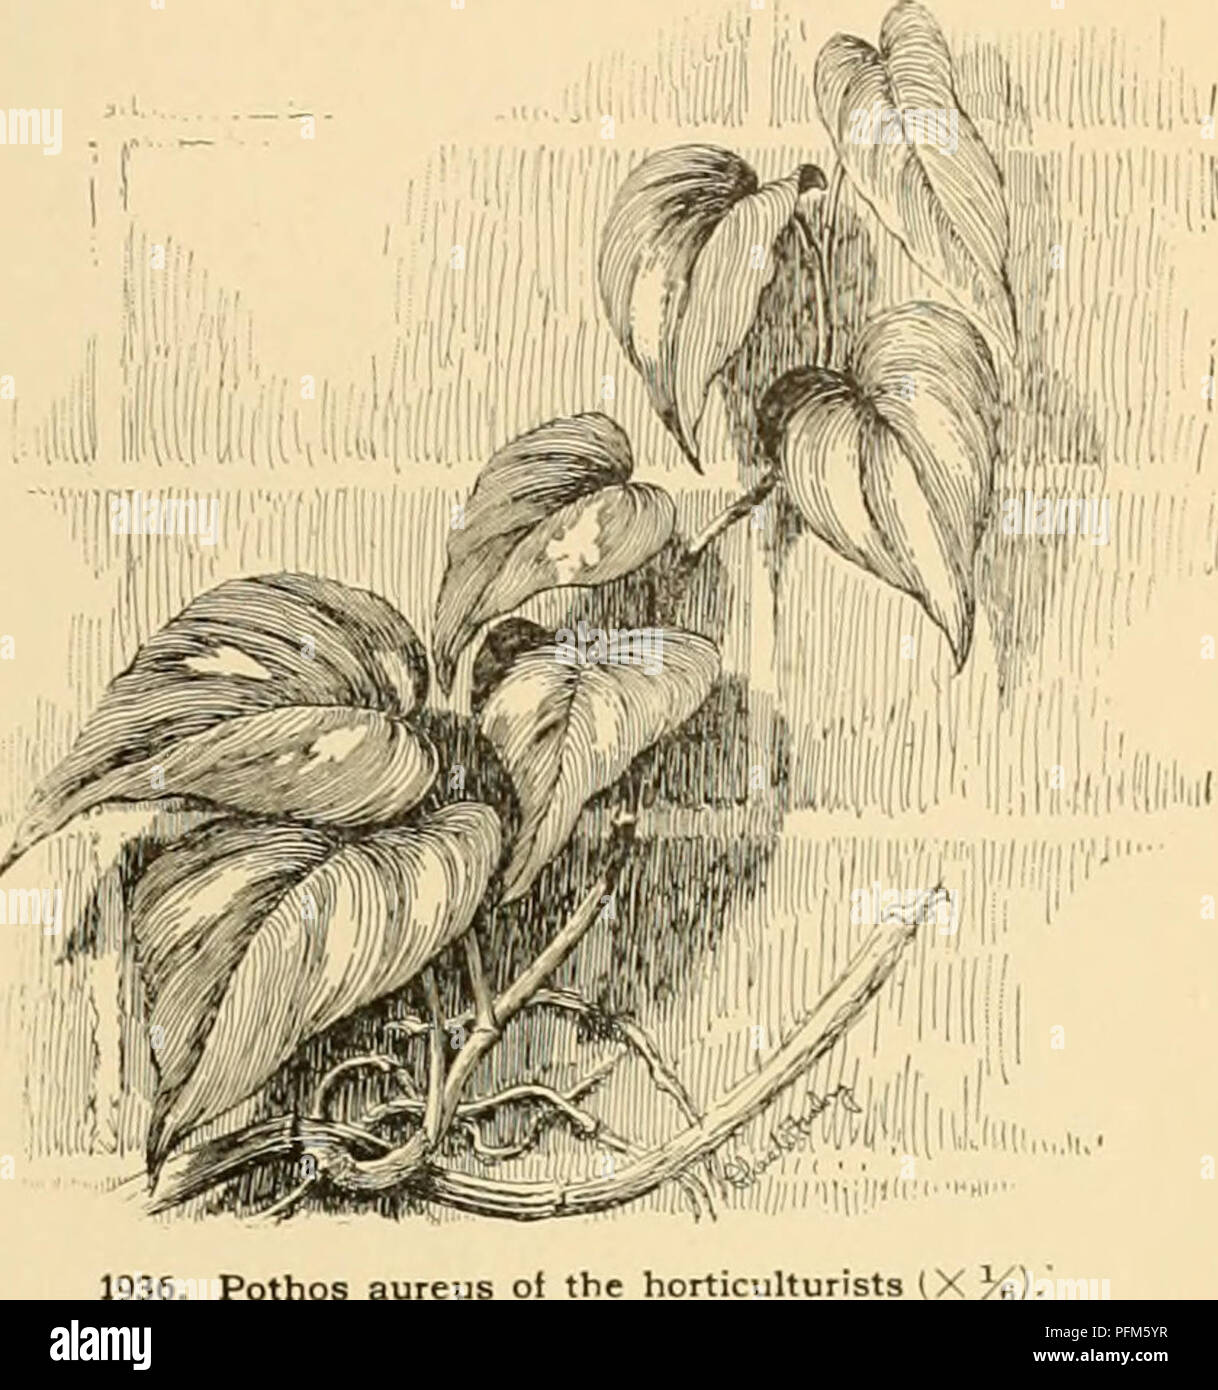 . Cyclopedia of American horticulture : comprising suggestions for cultivation of horticultural plants, descriptions of the species of fruits, vegetables, flowers, and ornamental plants sold in the United States and Canada, together with geographical and biographical sketches. Gardening; Horticulture; Horticulture; Horticulture. POTHOS A. Lva.ijrcvn, not banihd or mottled. celatocaMis, N. E. Brown. Rapid-growing climber, witli stems flat on the under side and lying close to its support: Ivs. distichous and overlapping, broad-elliptic, somewhat oblique, sessile, strongly manj--veined, dark velv Stock Photo